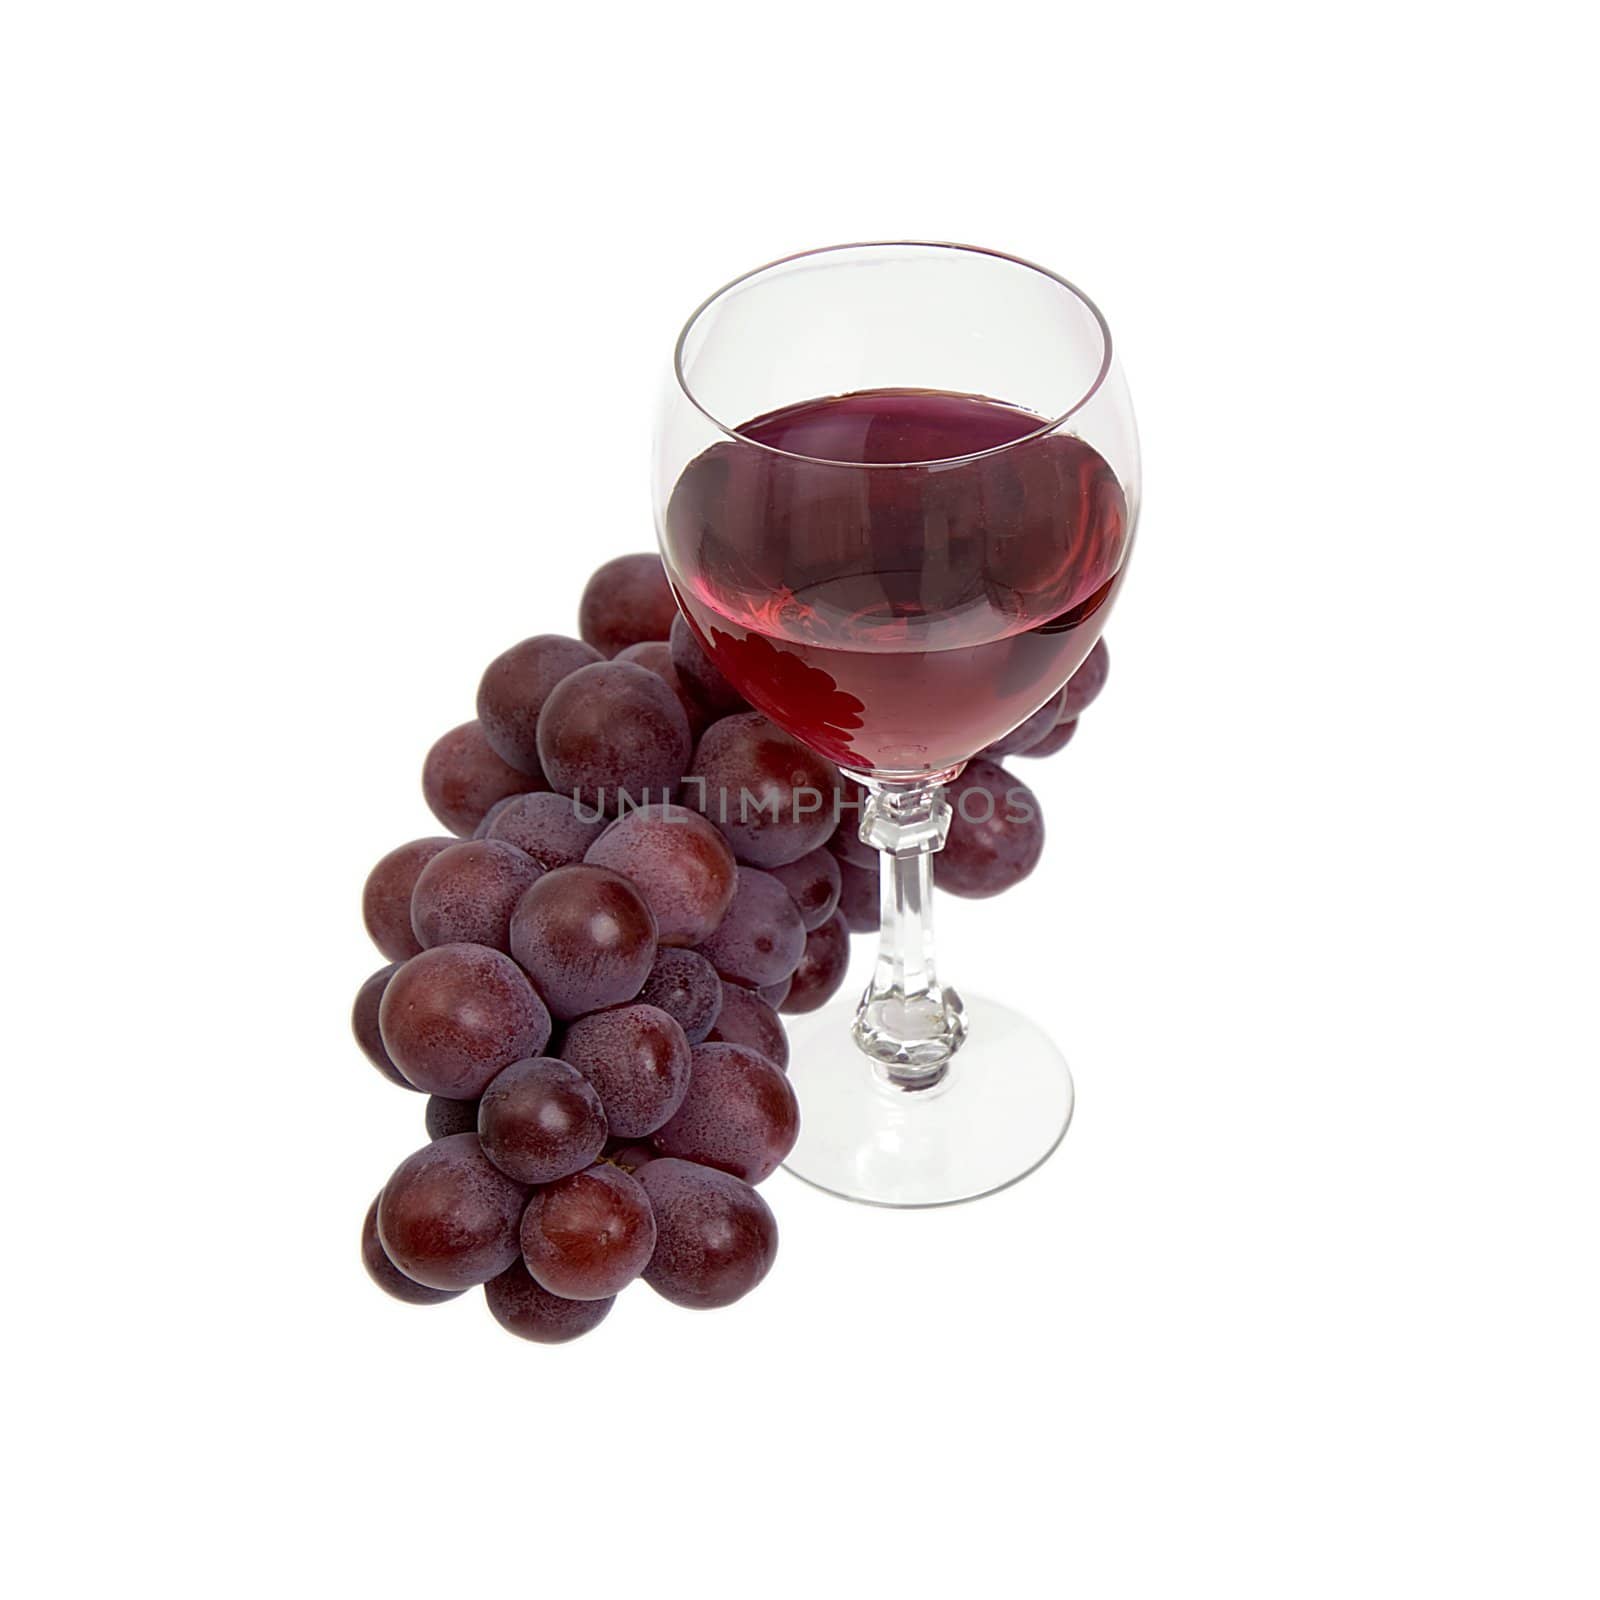 Red grapes and glass with wine on a white background